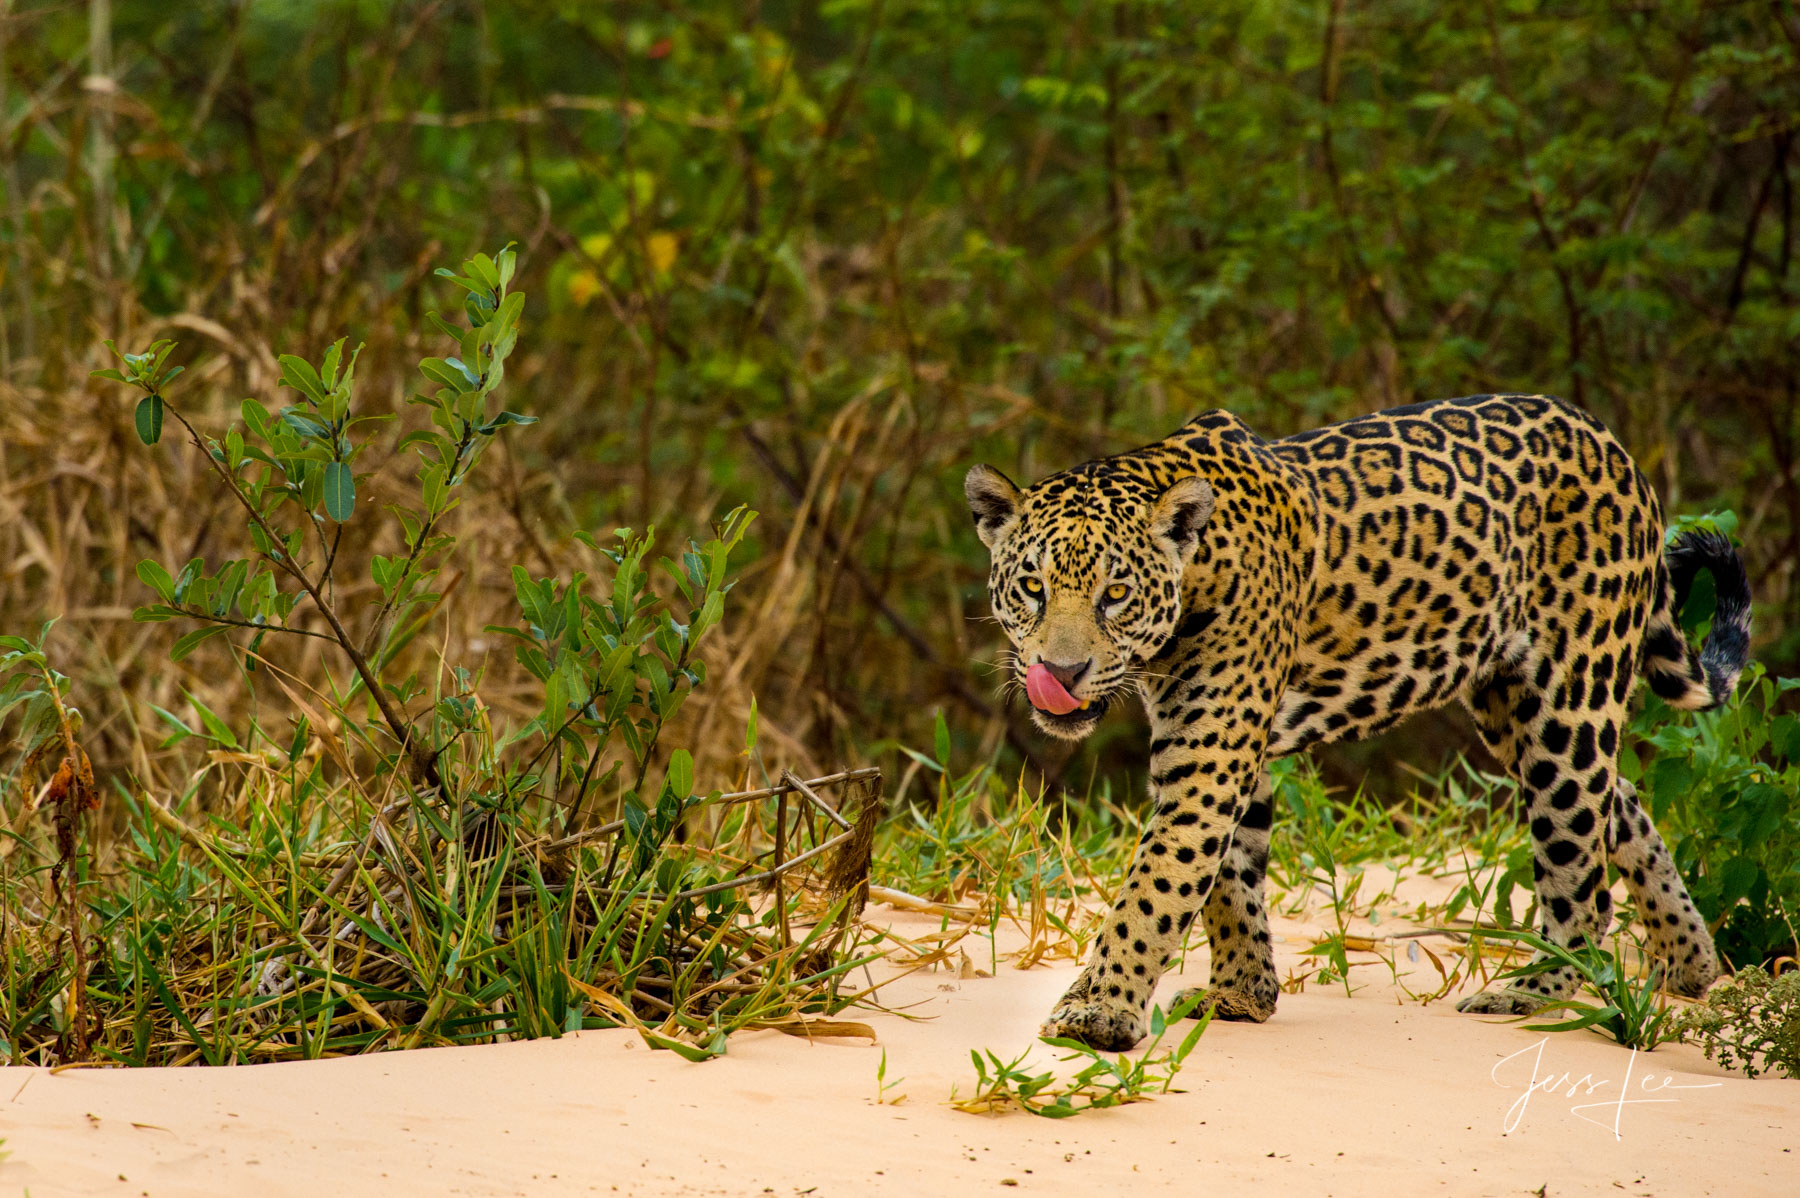 Fine art Jaguar hunting the beach print limited edition of 300 luxury prints by Jess Lee. All photographs copyright © Jess Lee...